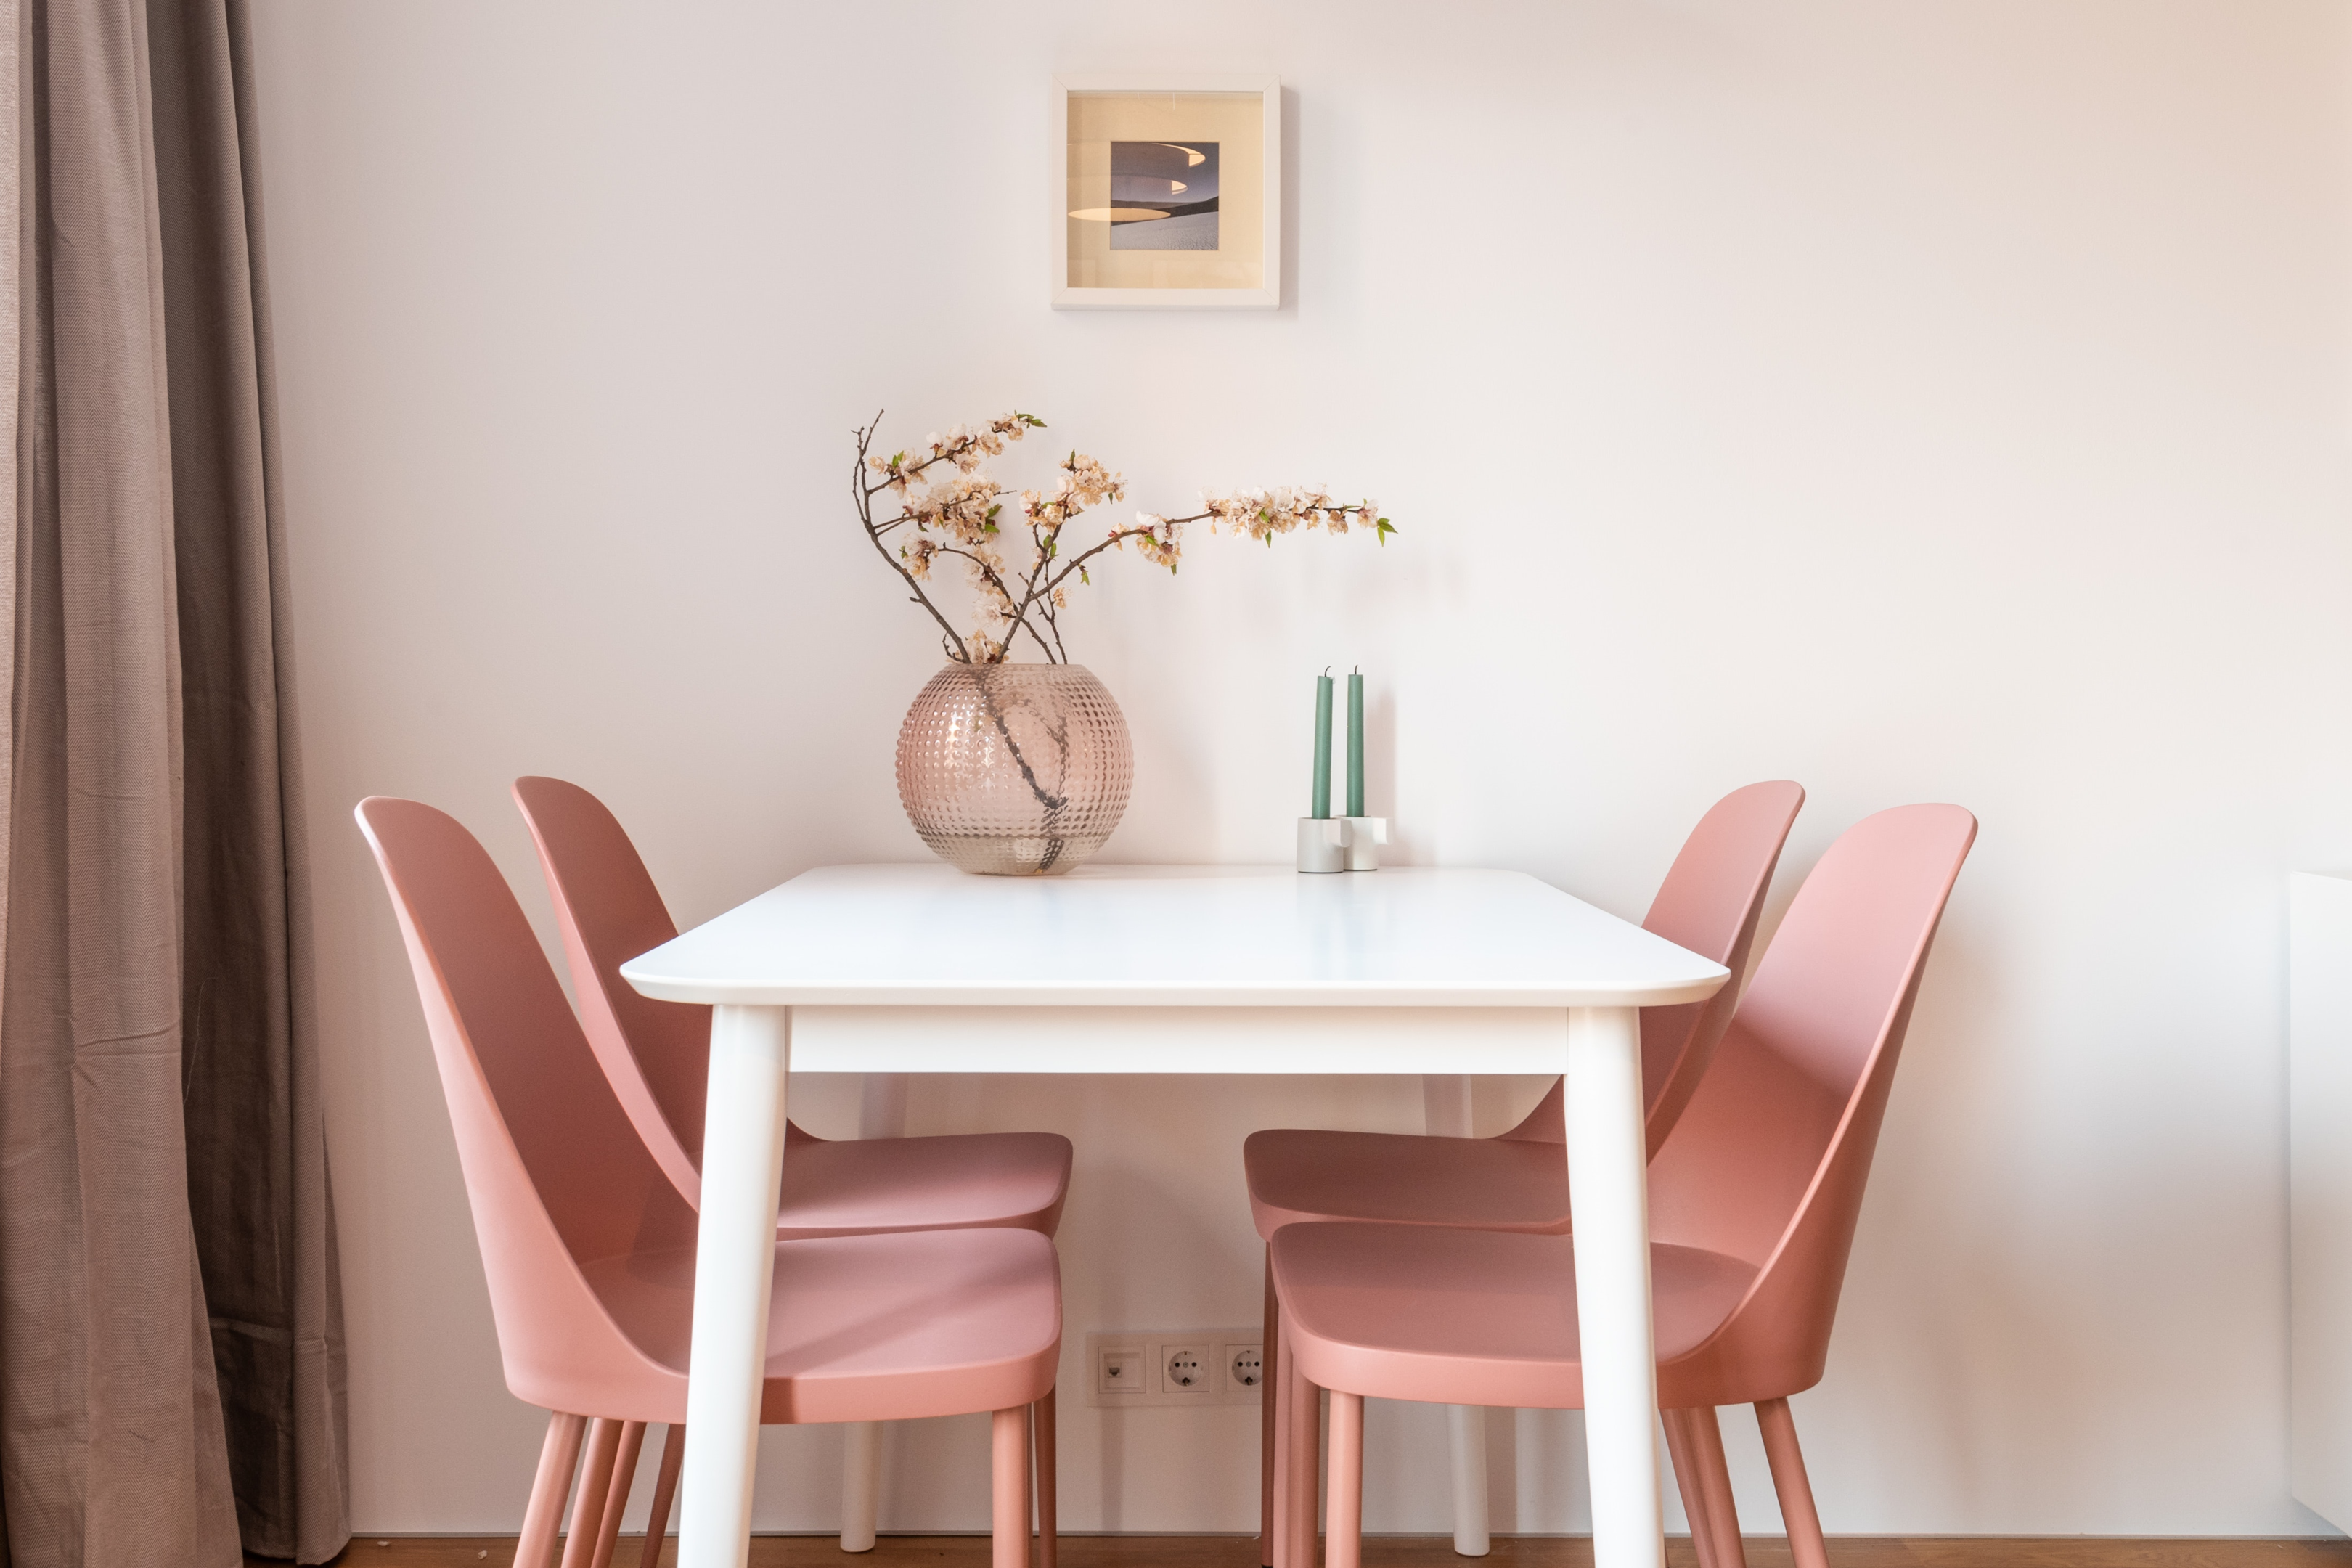 Photo by Max Vakhtbovych: https://www.pexels.com/photo/dining-table-and-pink-chairs-in-light-dining-room-6180675/